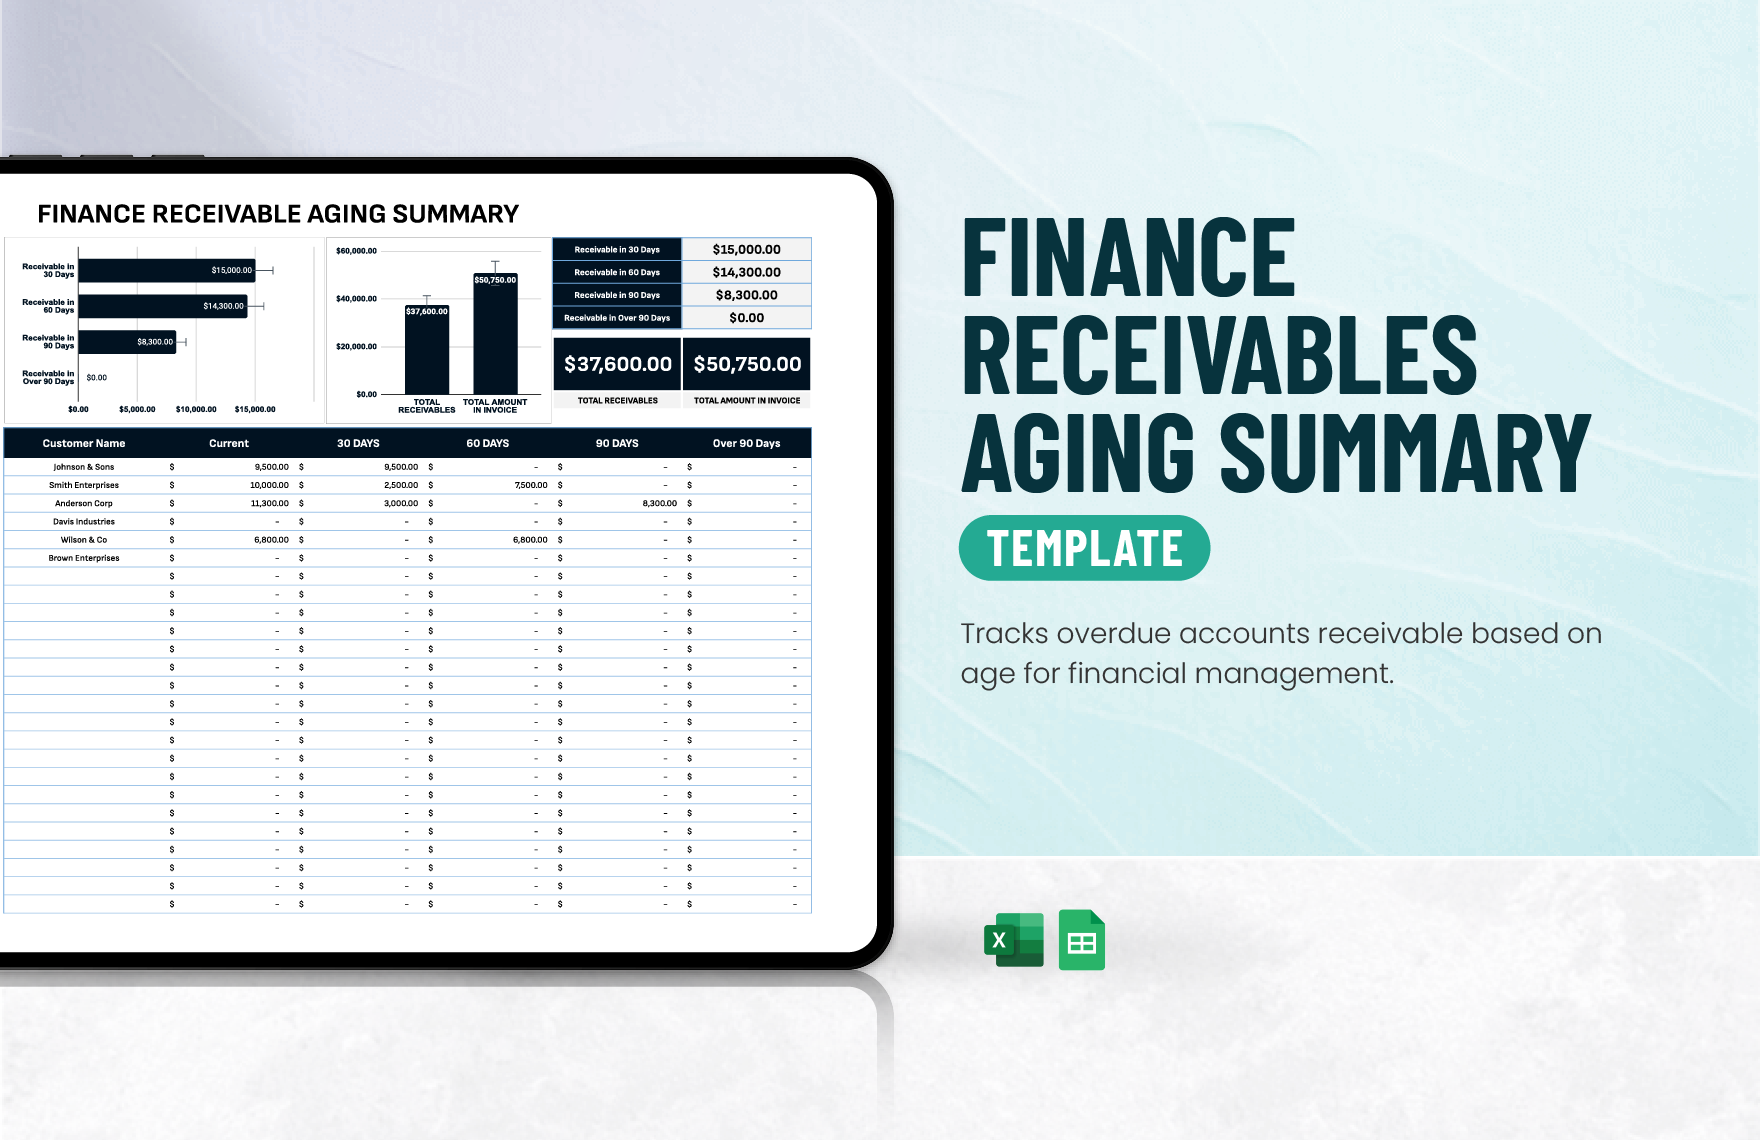 Finance Receivables Aging Summary Template in Excel, Google Sheets